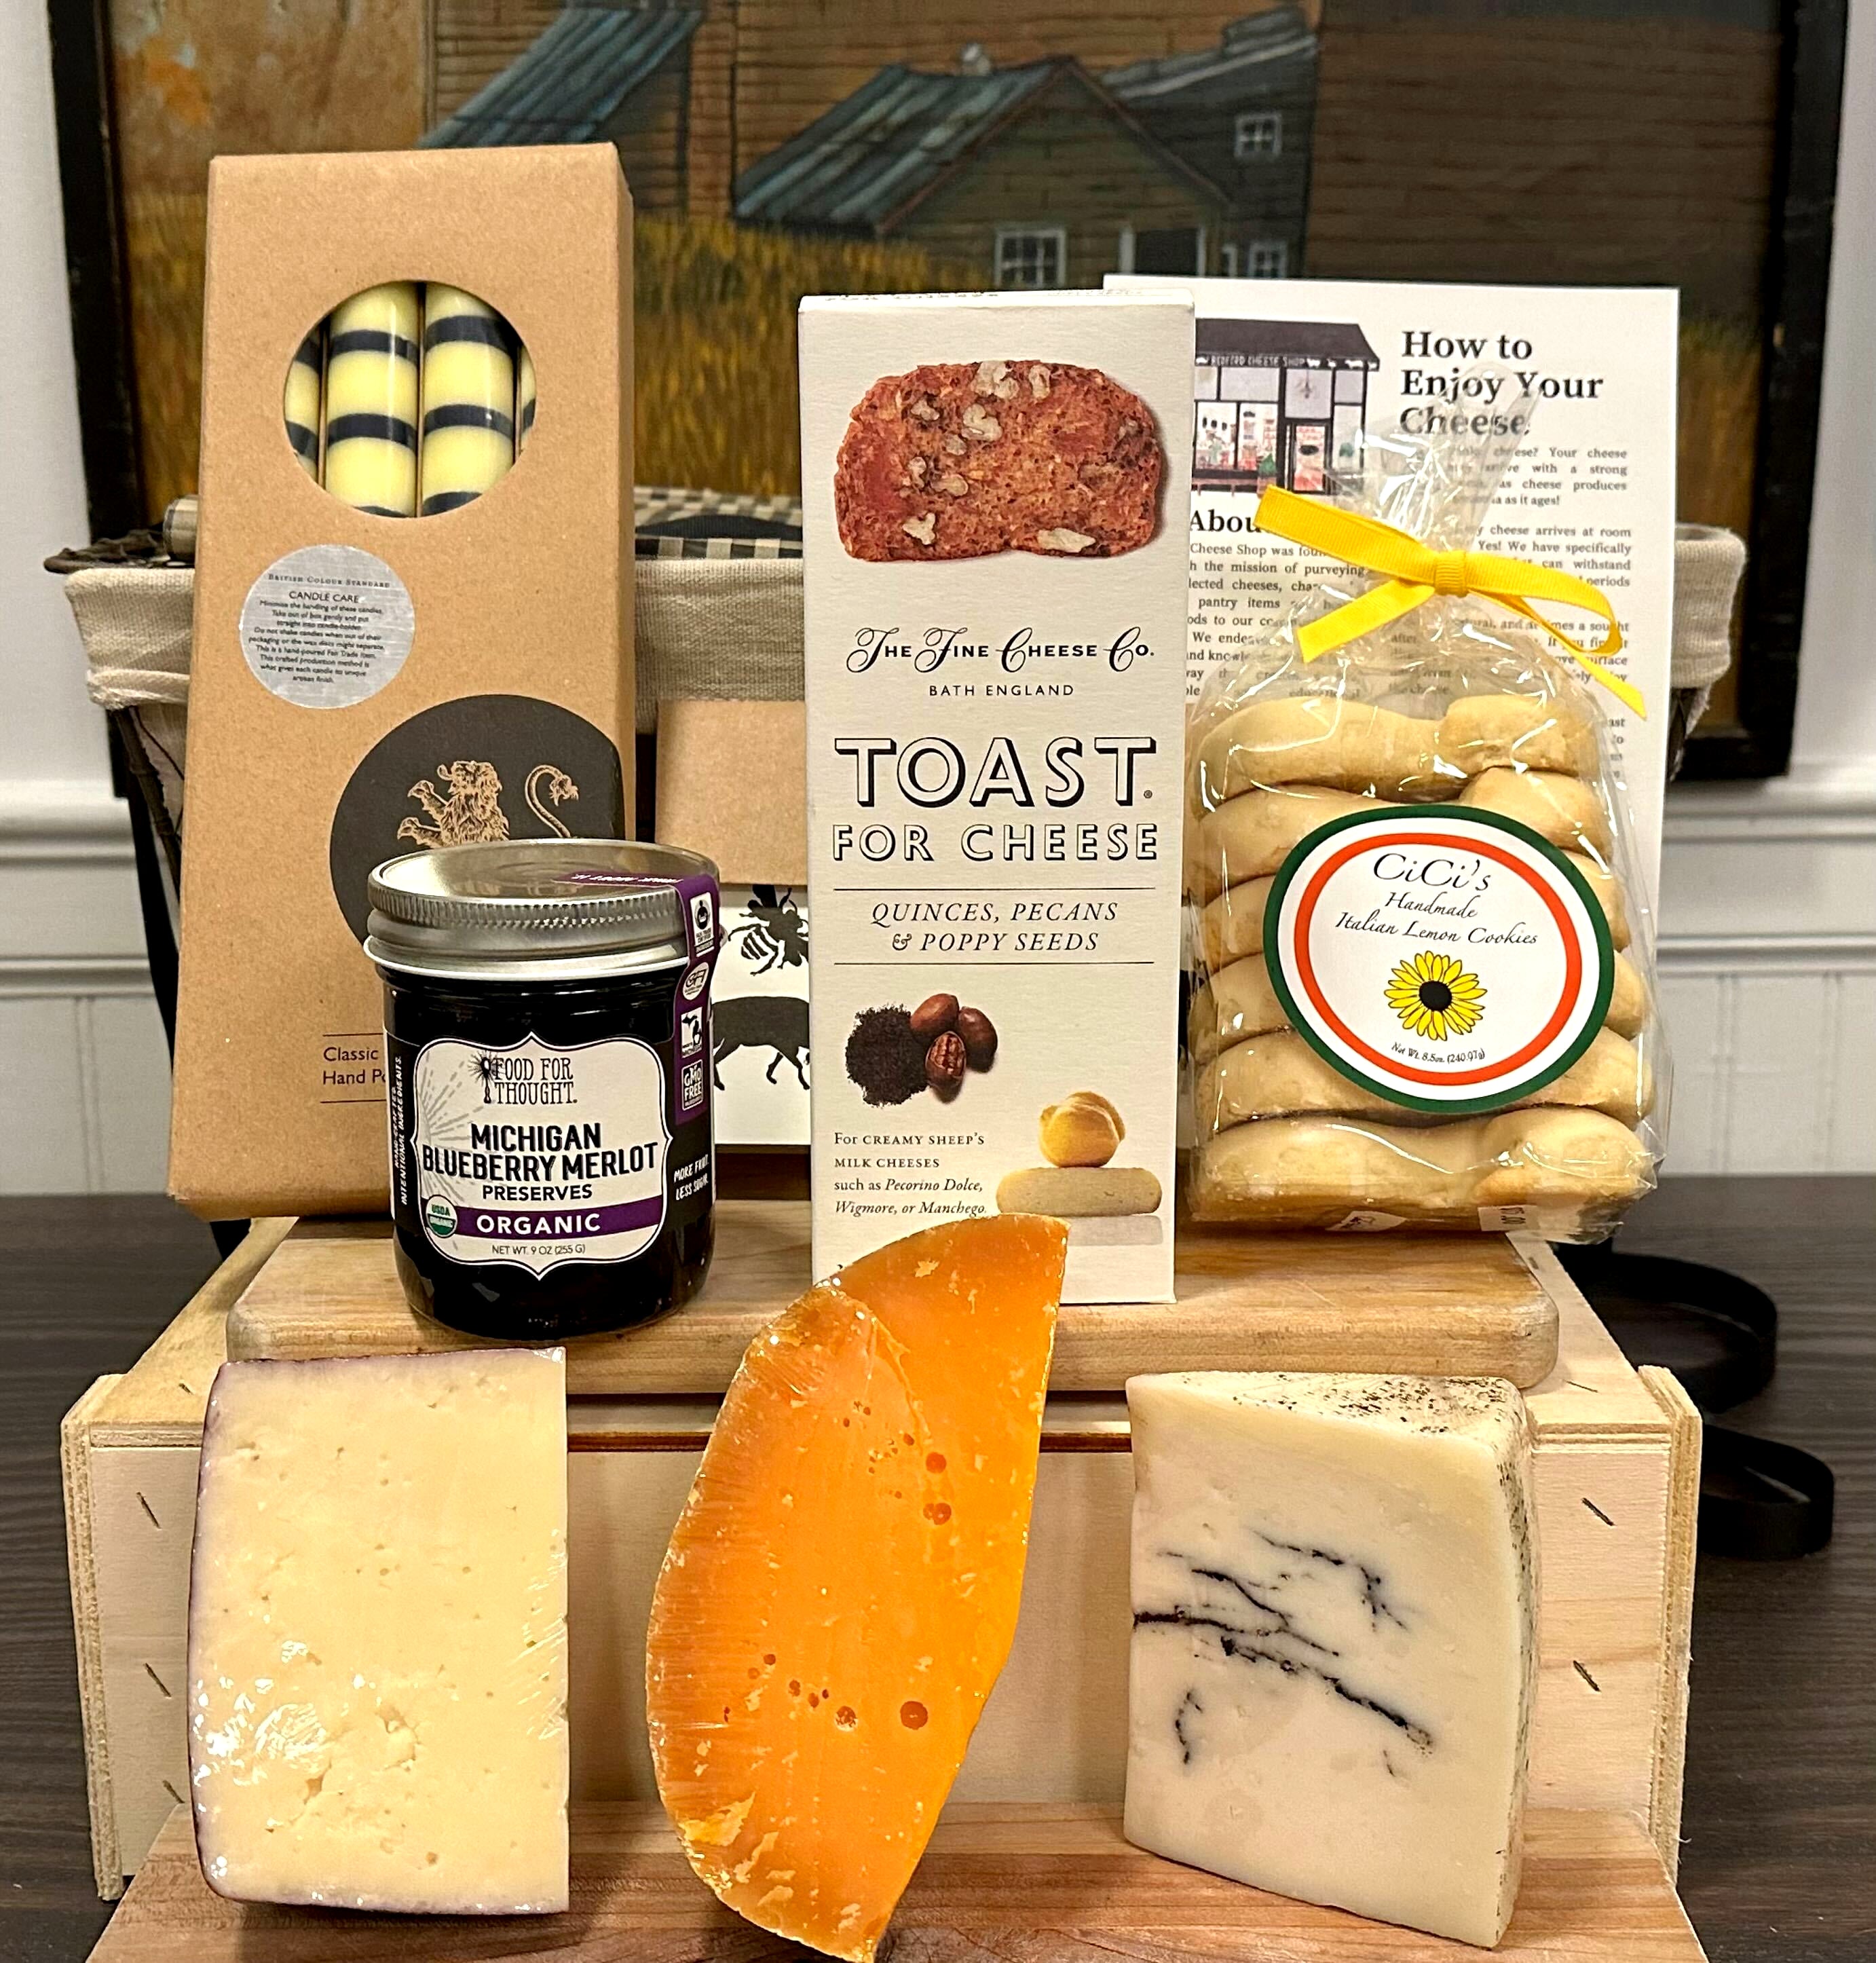 Image of the Bryant Park gift basket contents. Including: cnadle sticks, jam, crackers, cookies, assorted cheeses, and a card.